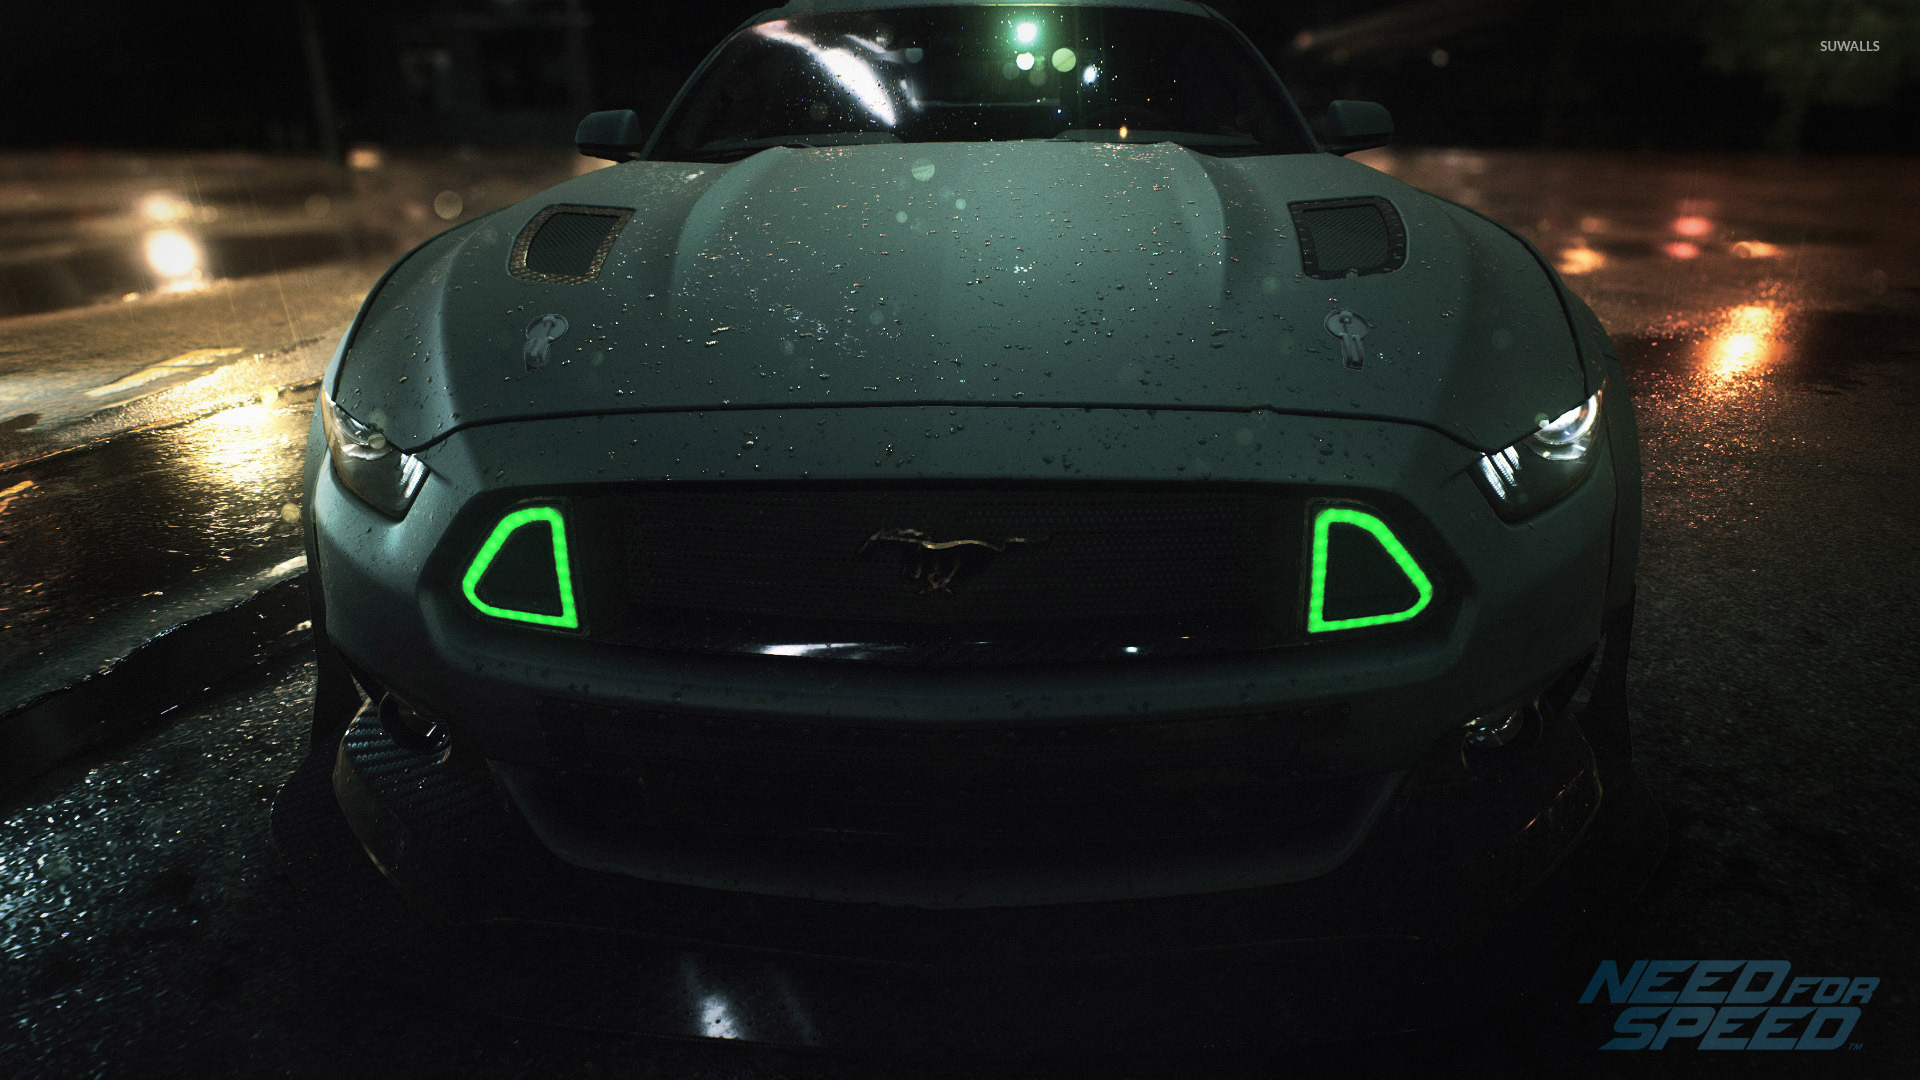 Ps4 Need For Speed Mustang - HD Wallpaper 